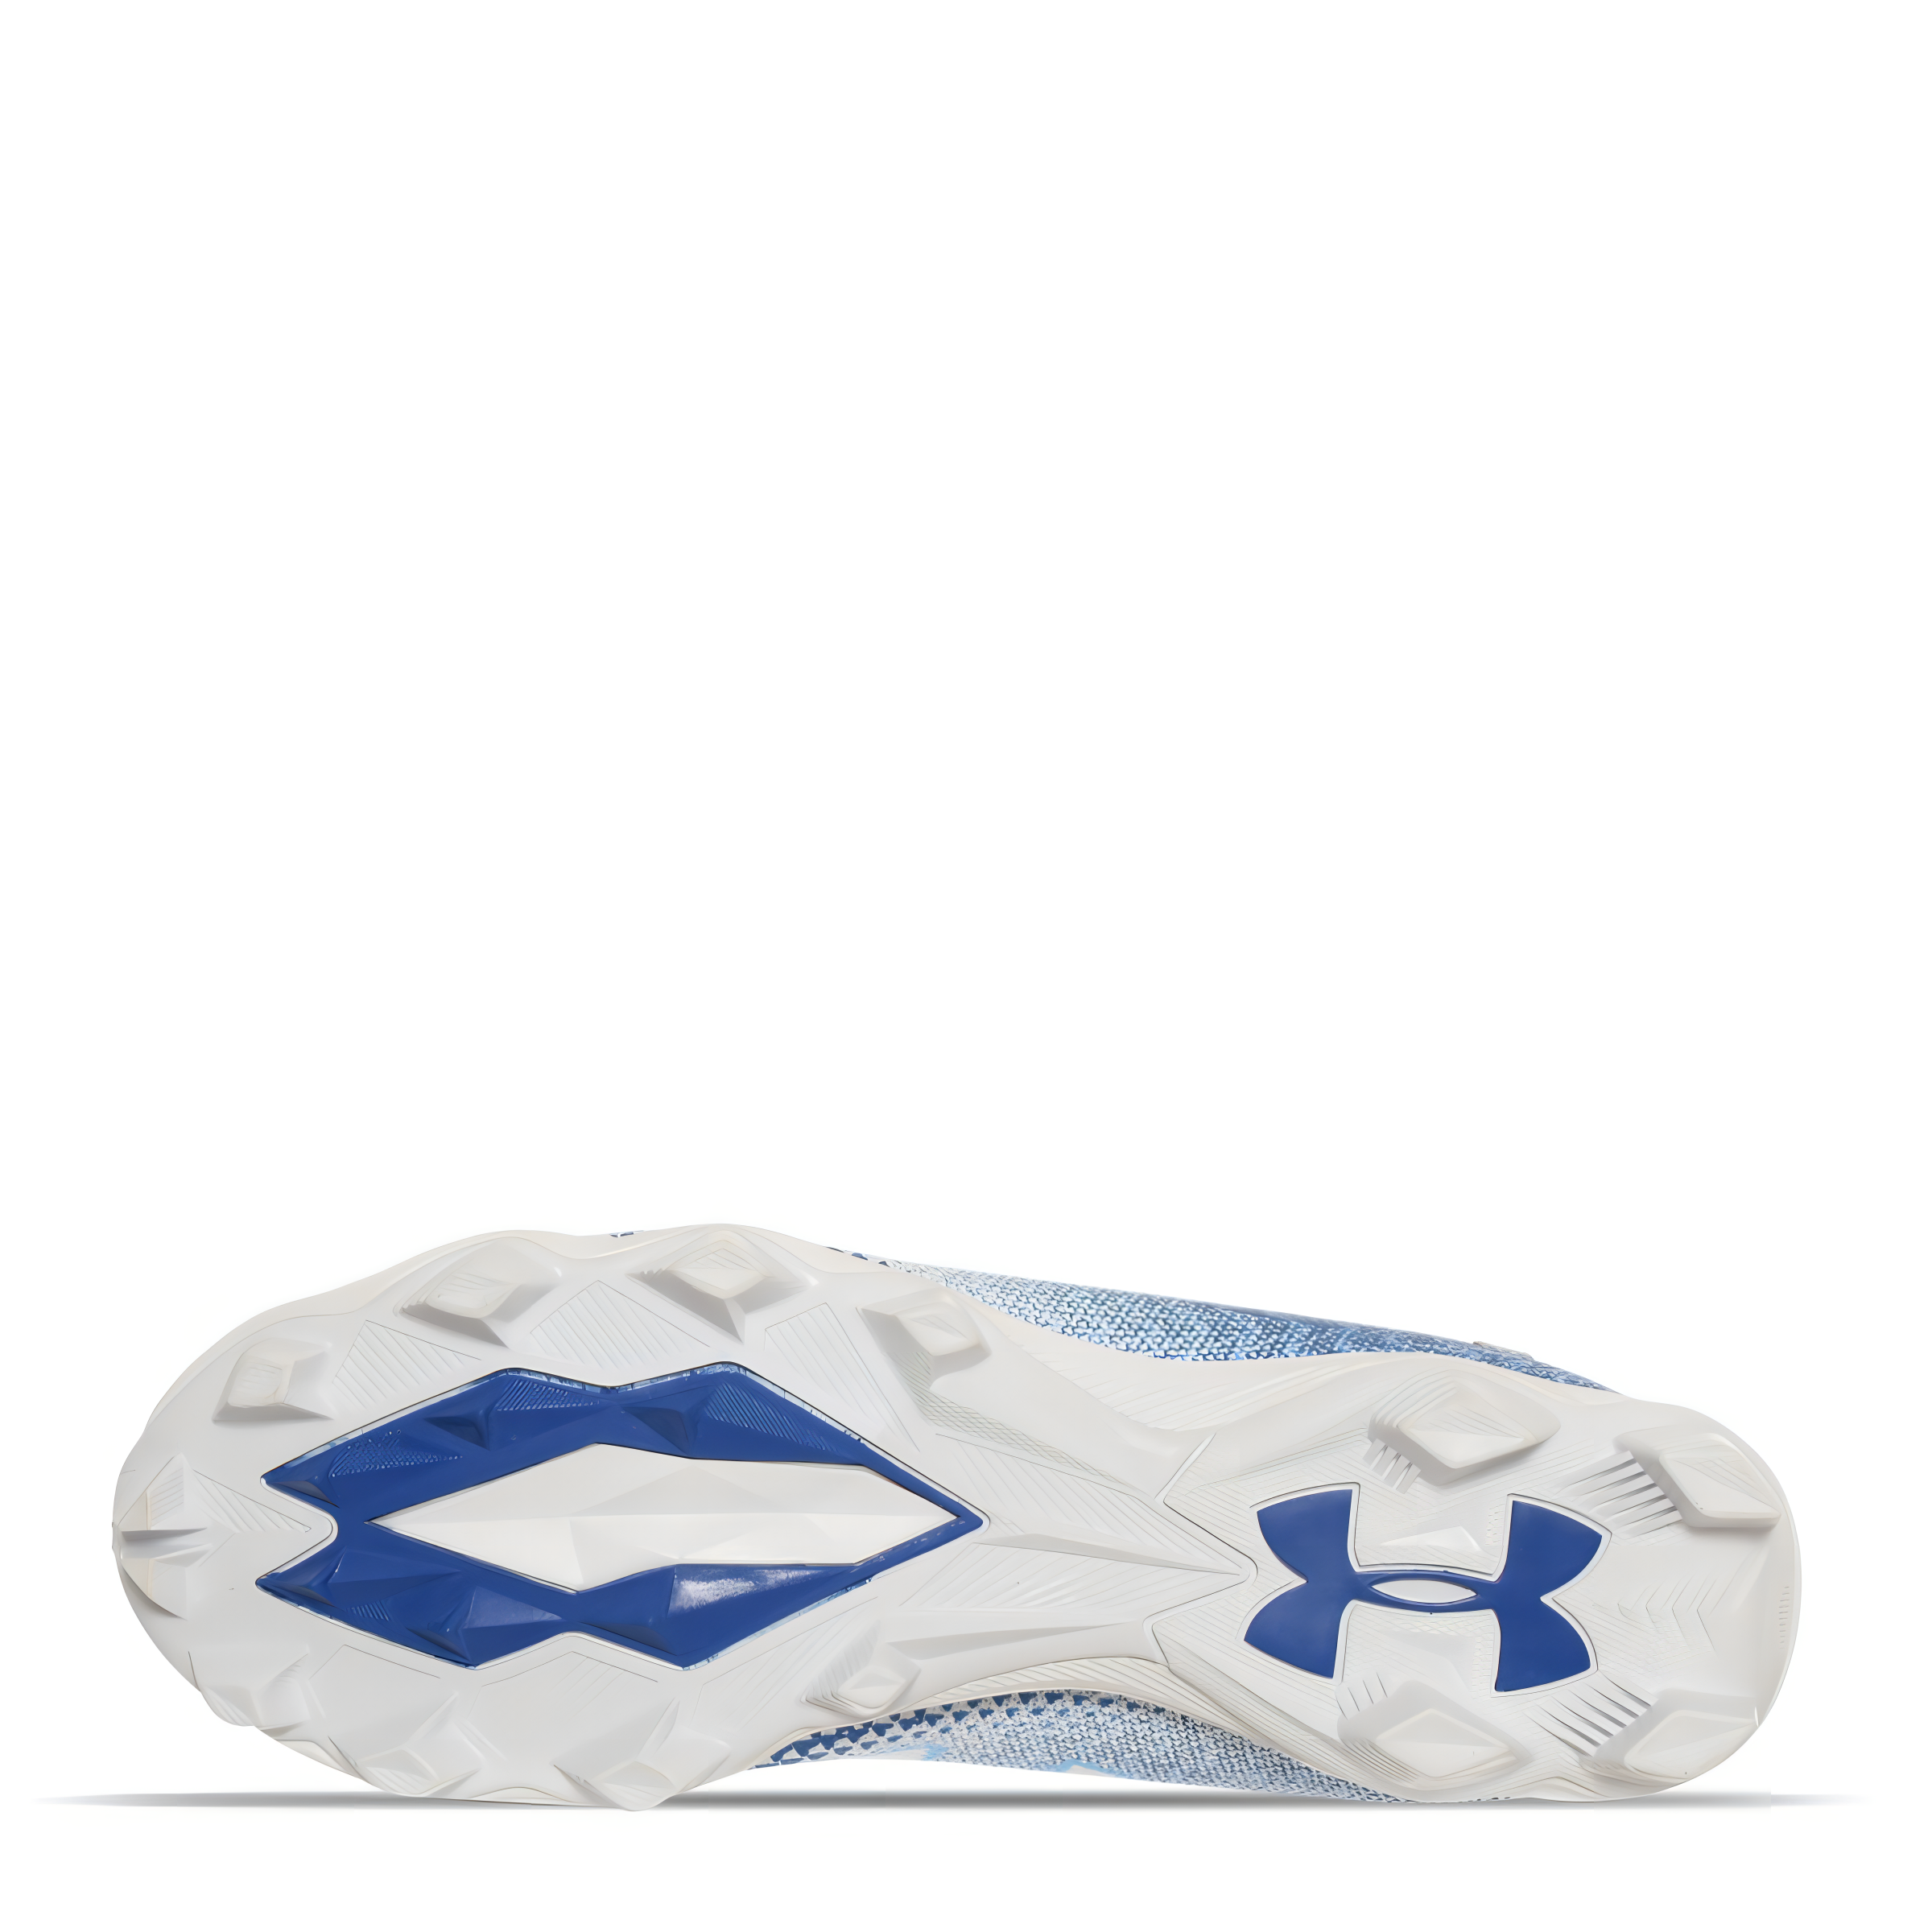 Zapato Cleats Under Armour Spotlight Franchise RM 3.0 Adulto